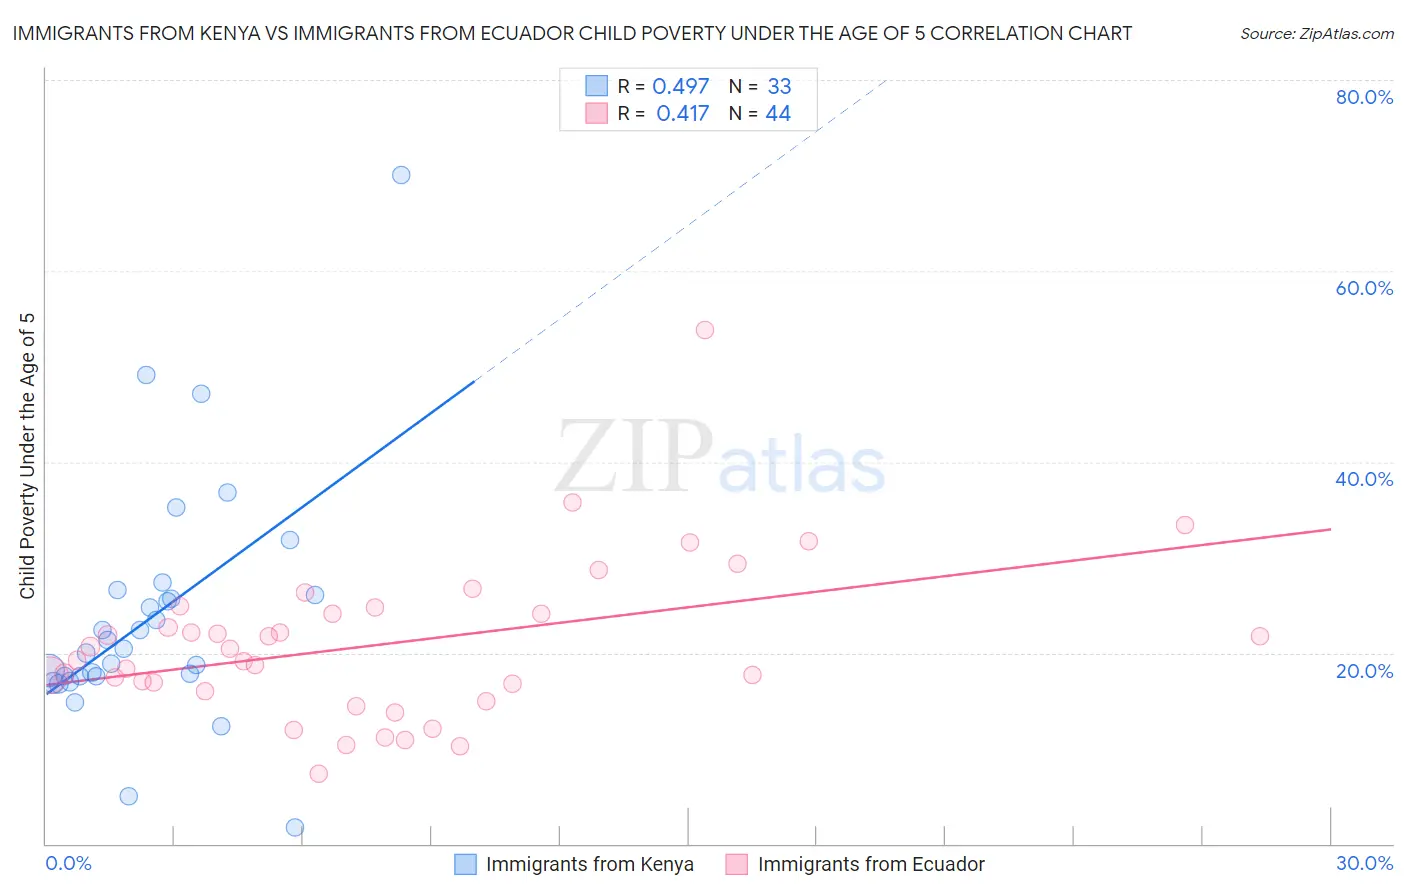 Immigrants from Kenya vs Immigrants from Ecuador Child Poverty Under the Age of 5